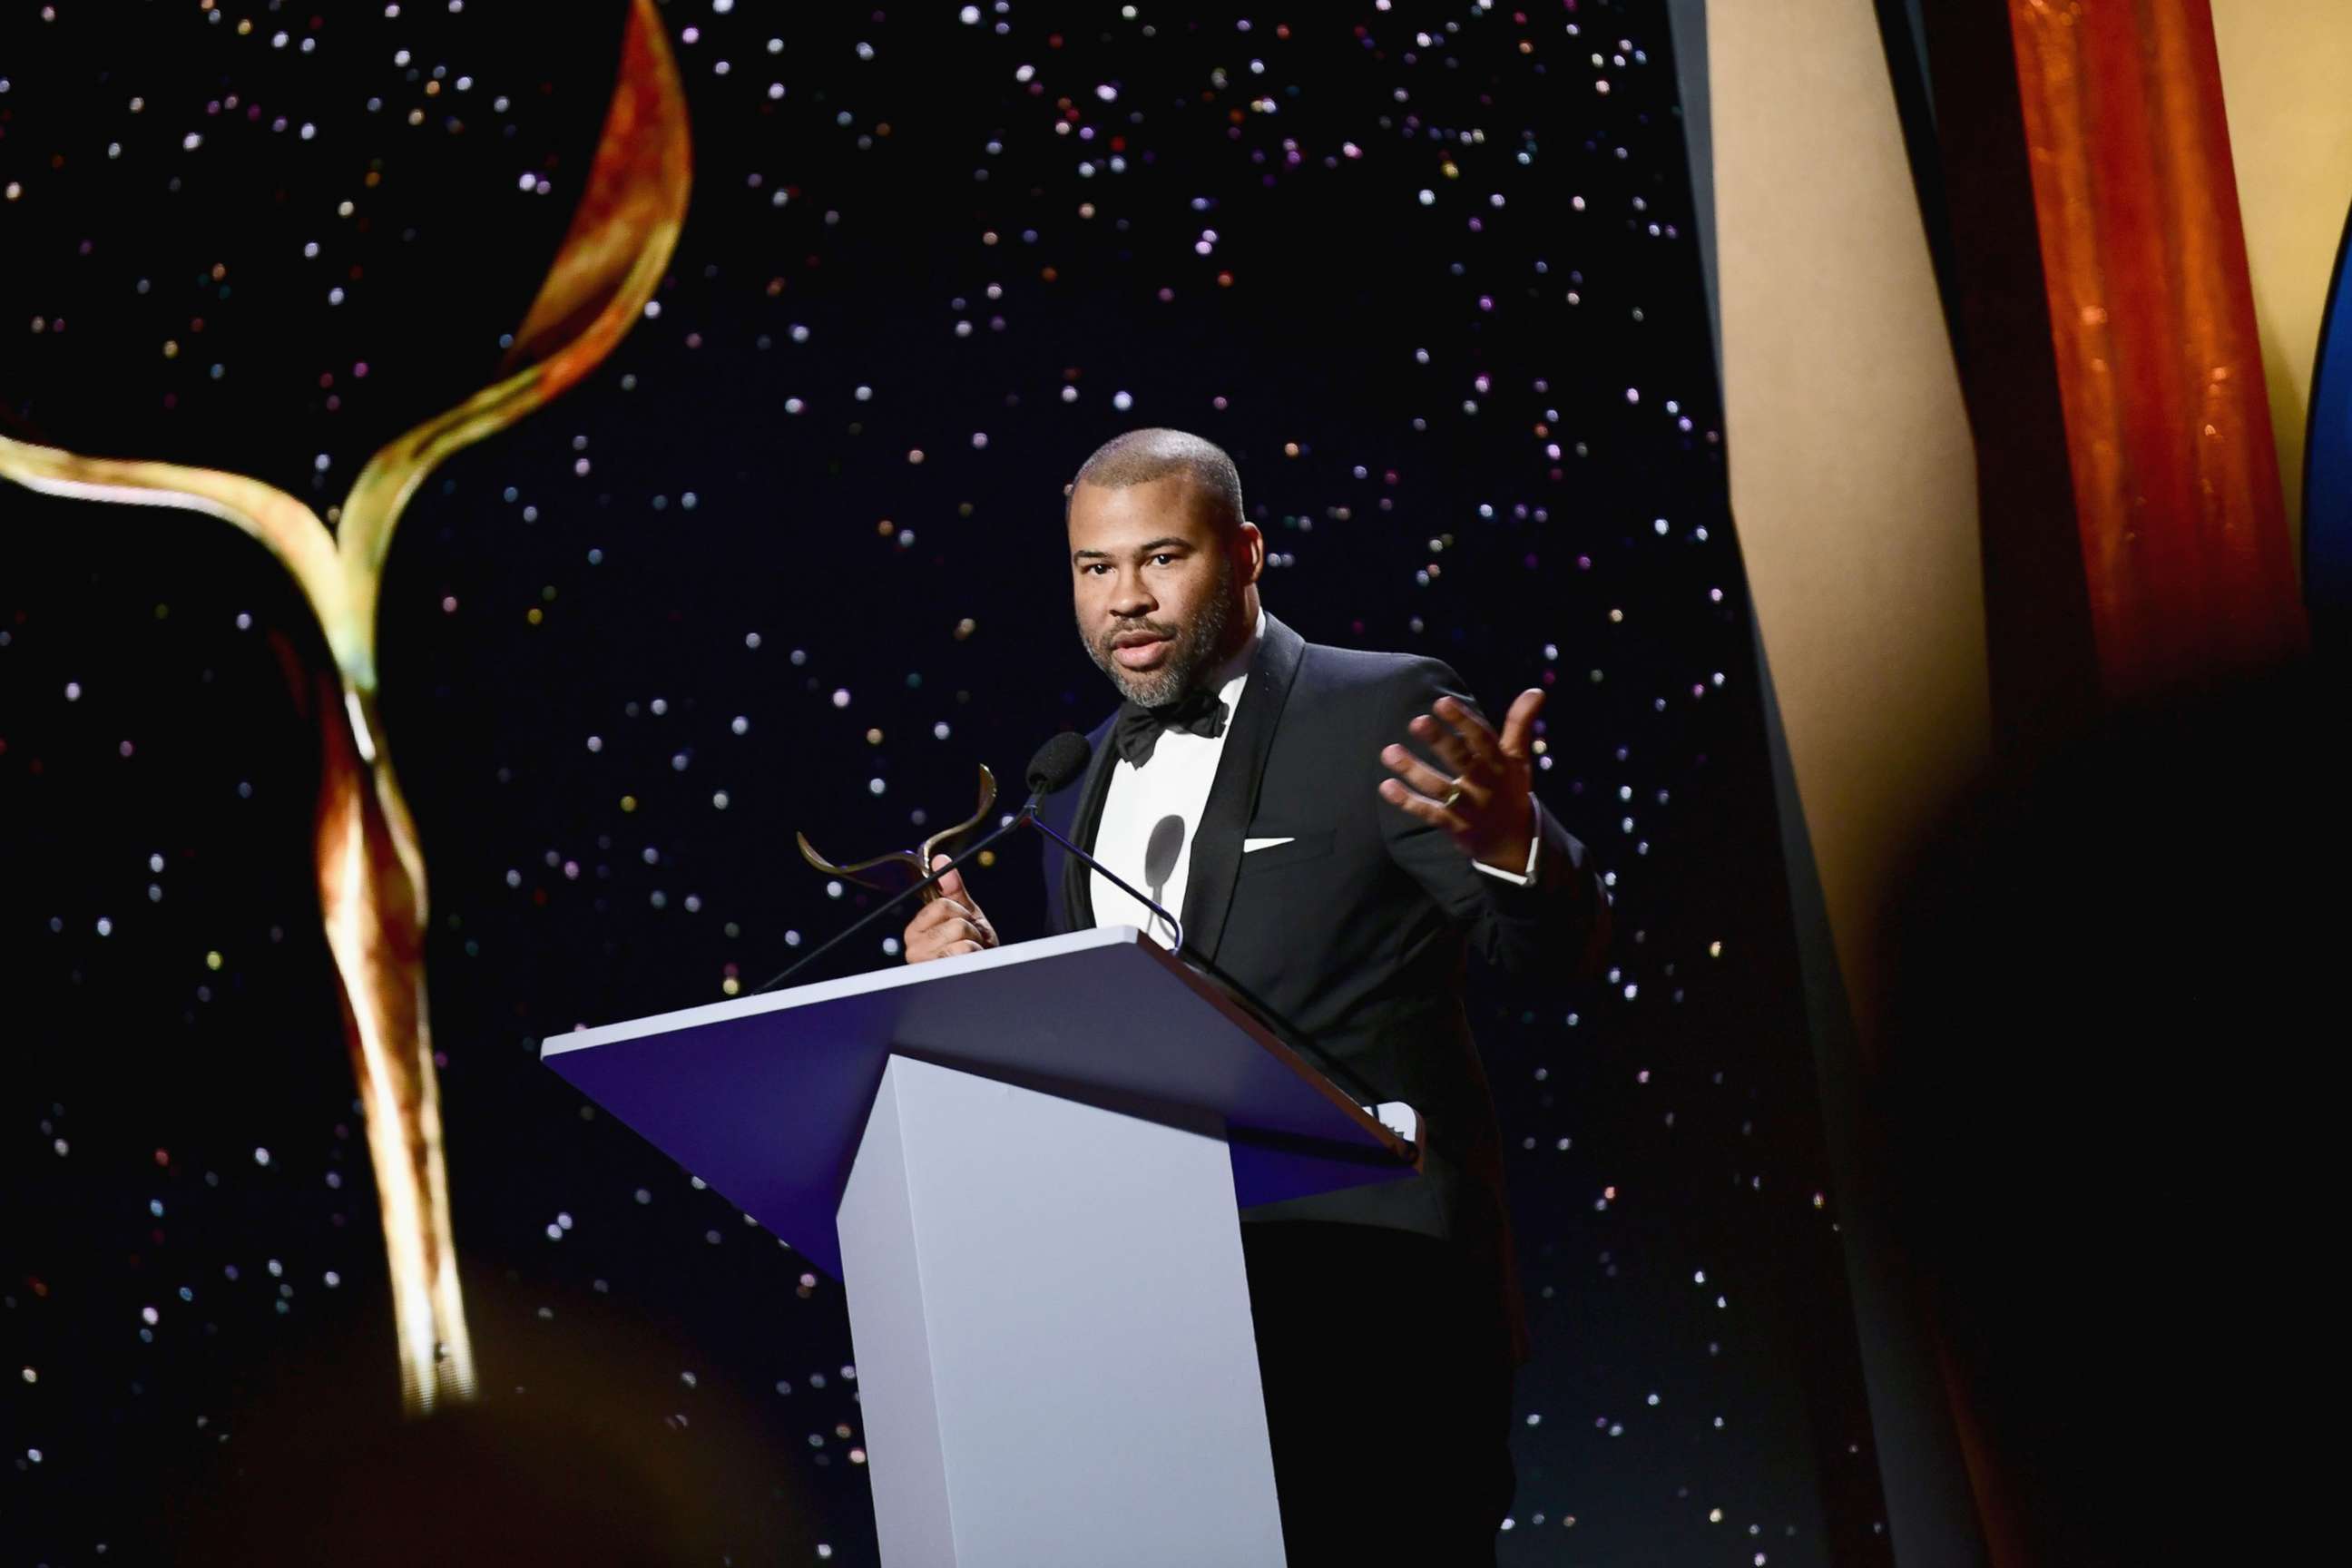 PHOTO: Jordan Peele speaks onstage during the 2018 Writers Guild Awards L.A. Ceremony at The Beverly Hilton Hotel, Feb. 11, 2018 in Beverly Hills. 